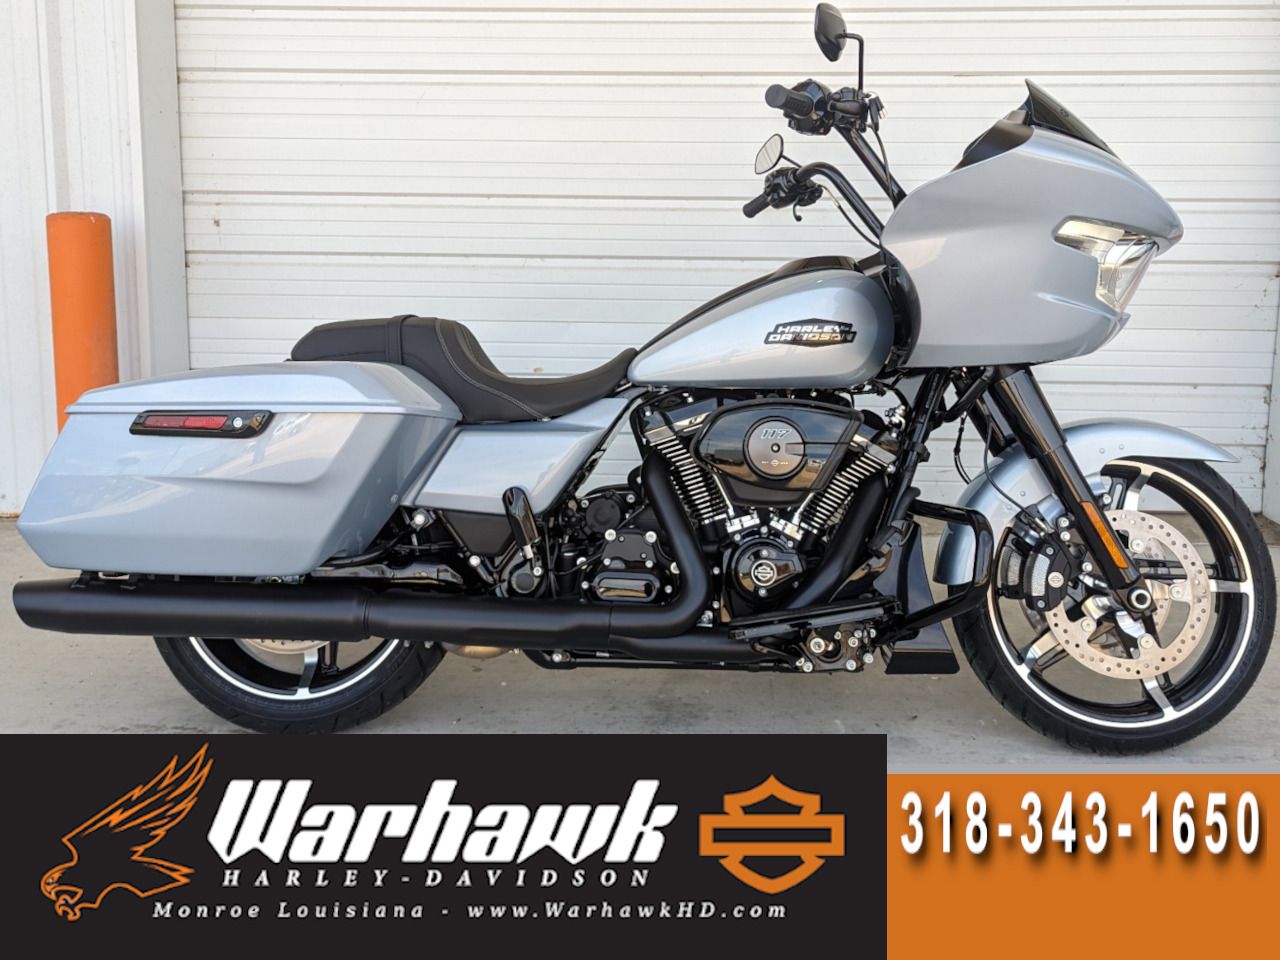 new 2024 harley davidson road glide in atlas silver and black for sale near me - Photo 1